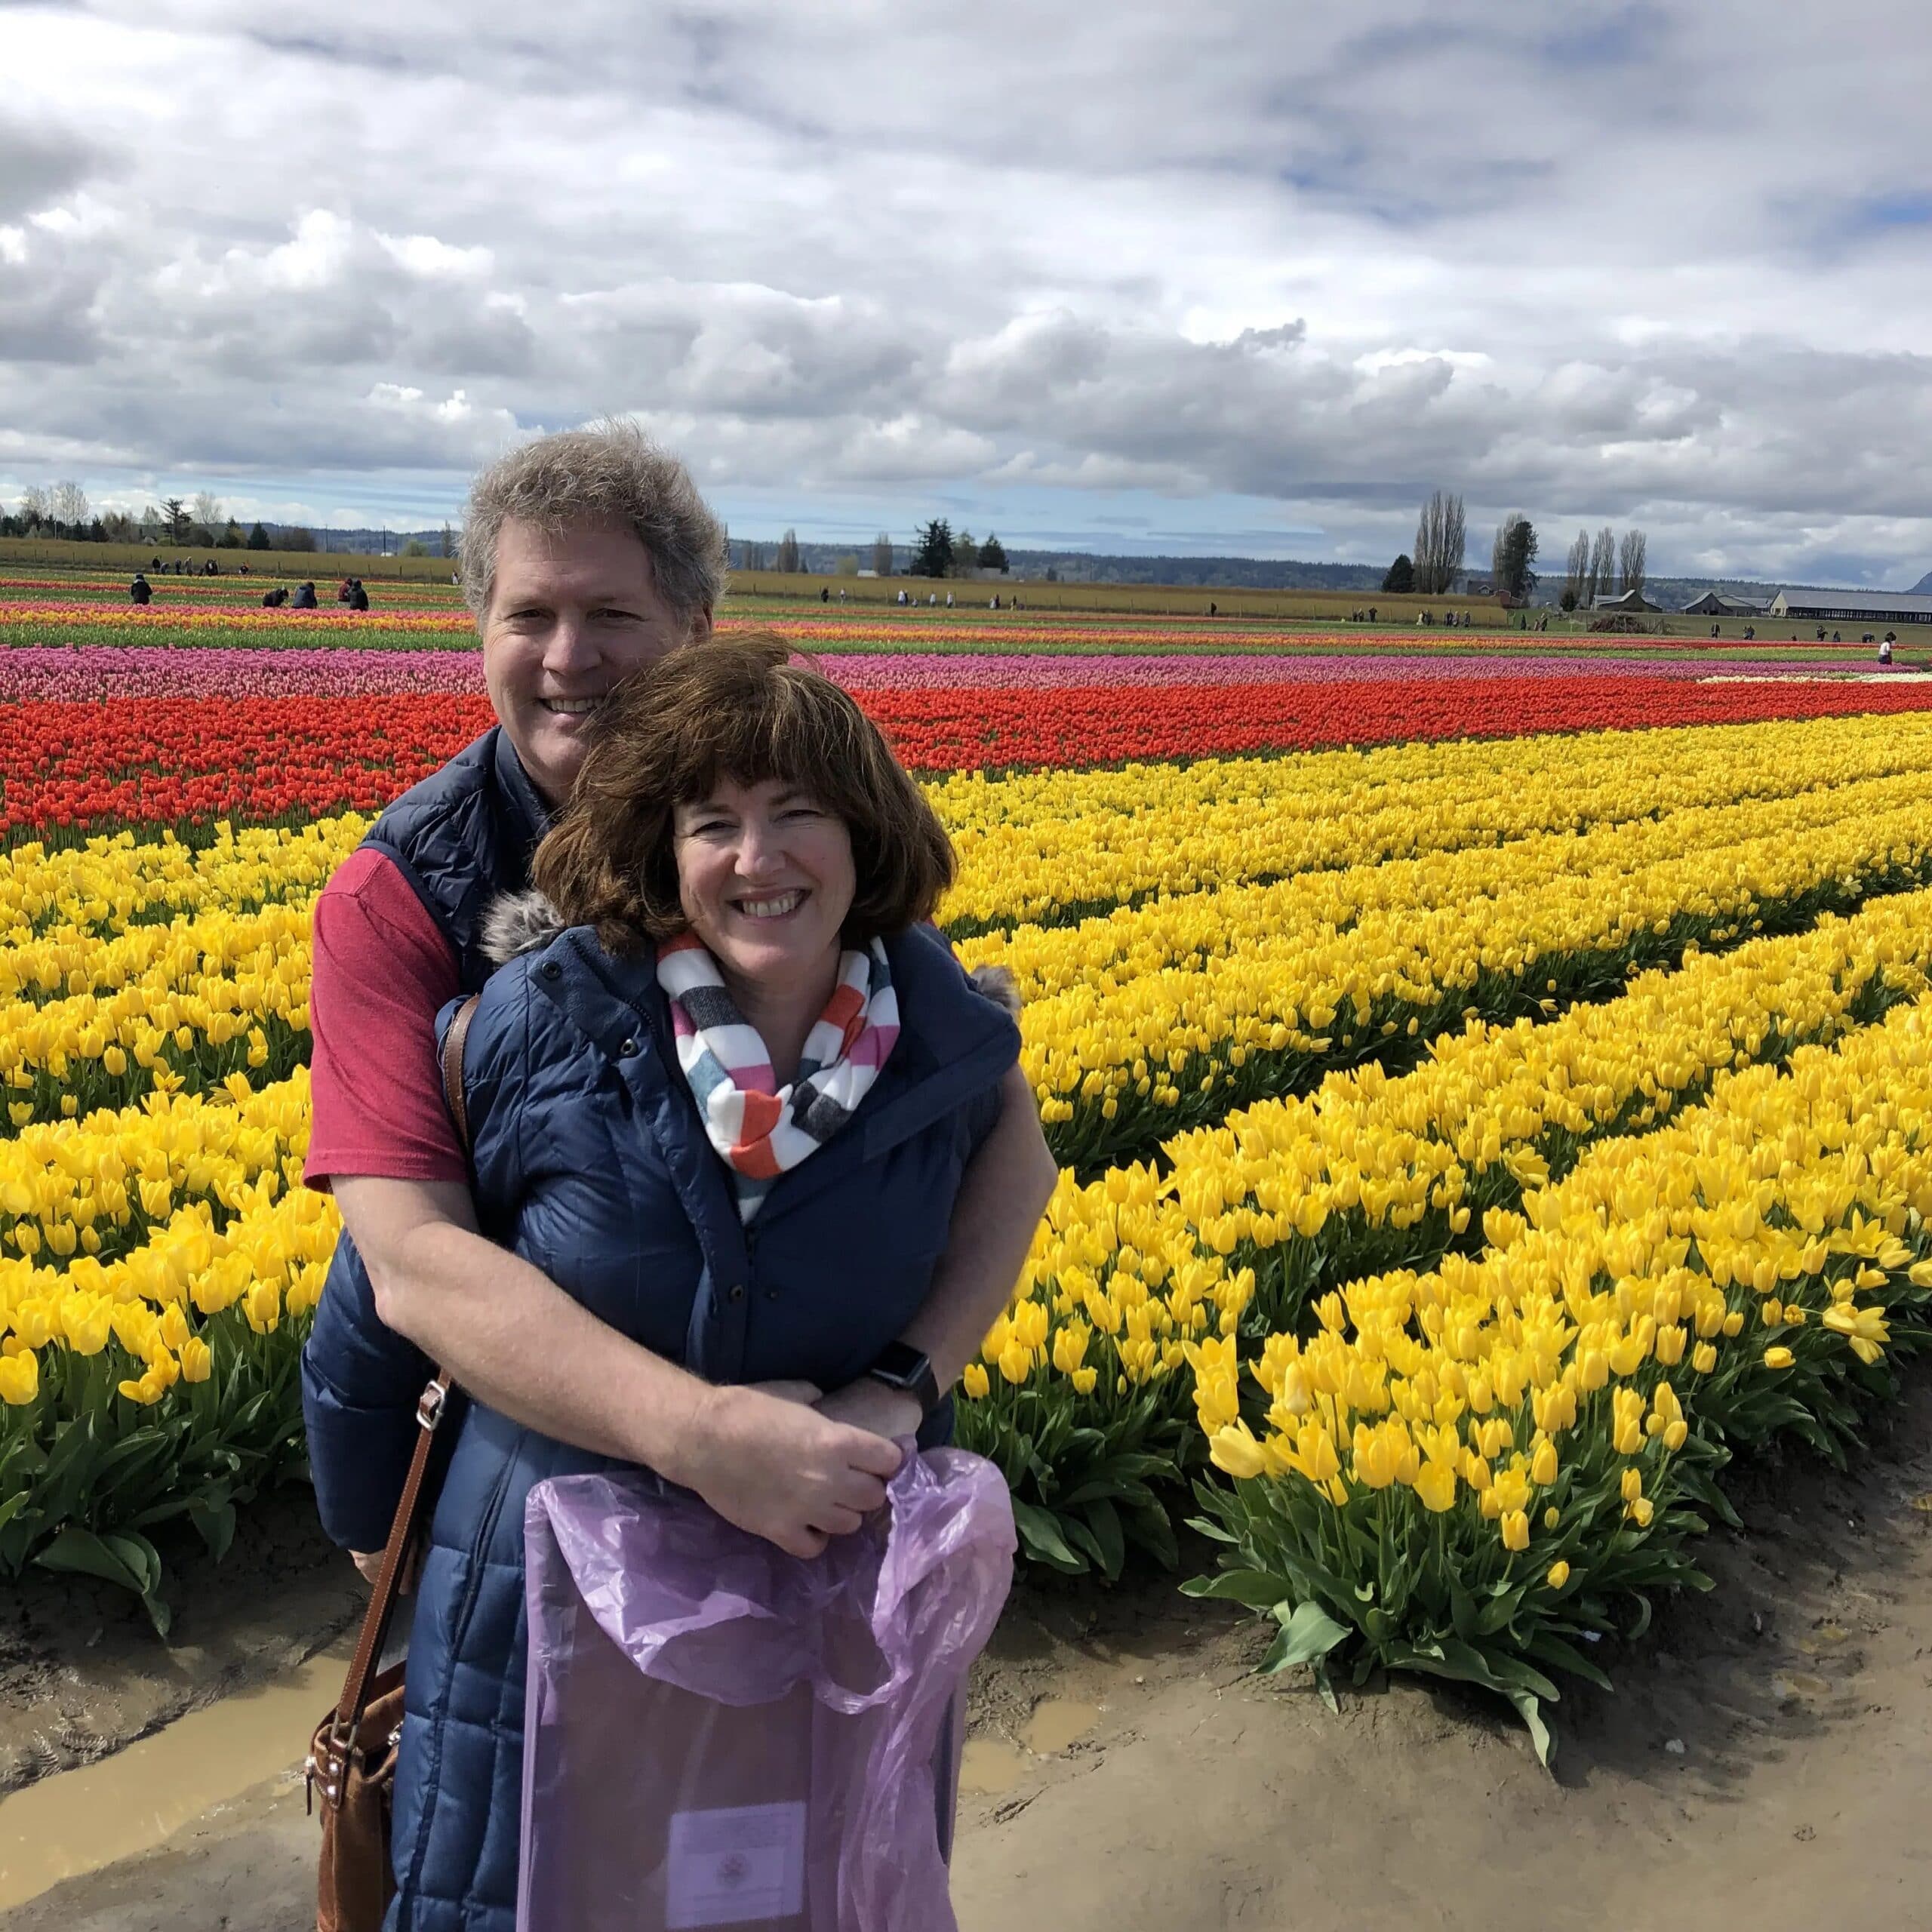 man and woman embracing in field of tulips